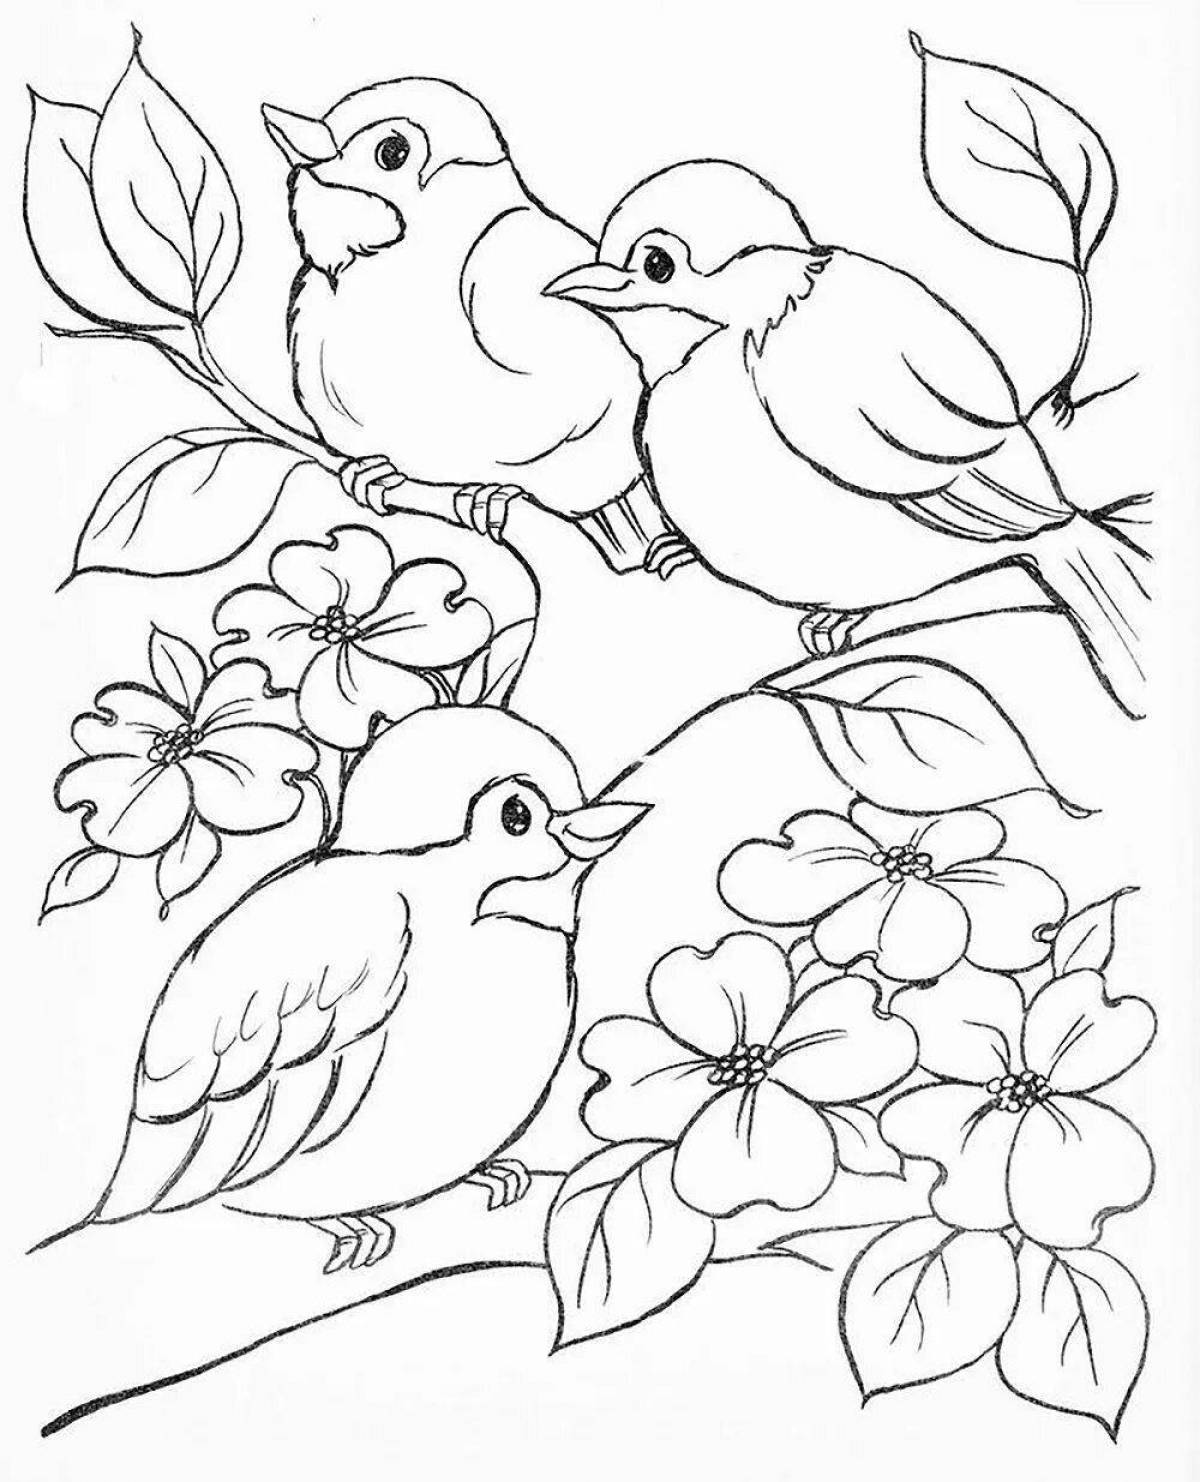 Dreamy bird coloring book for girls